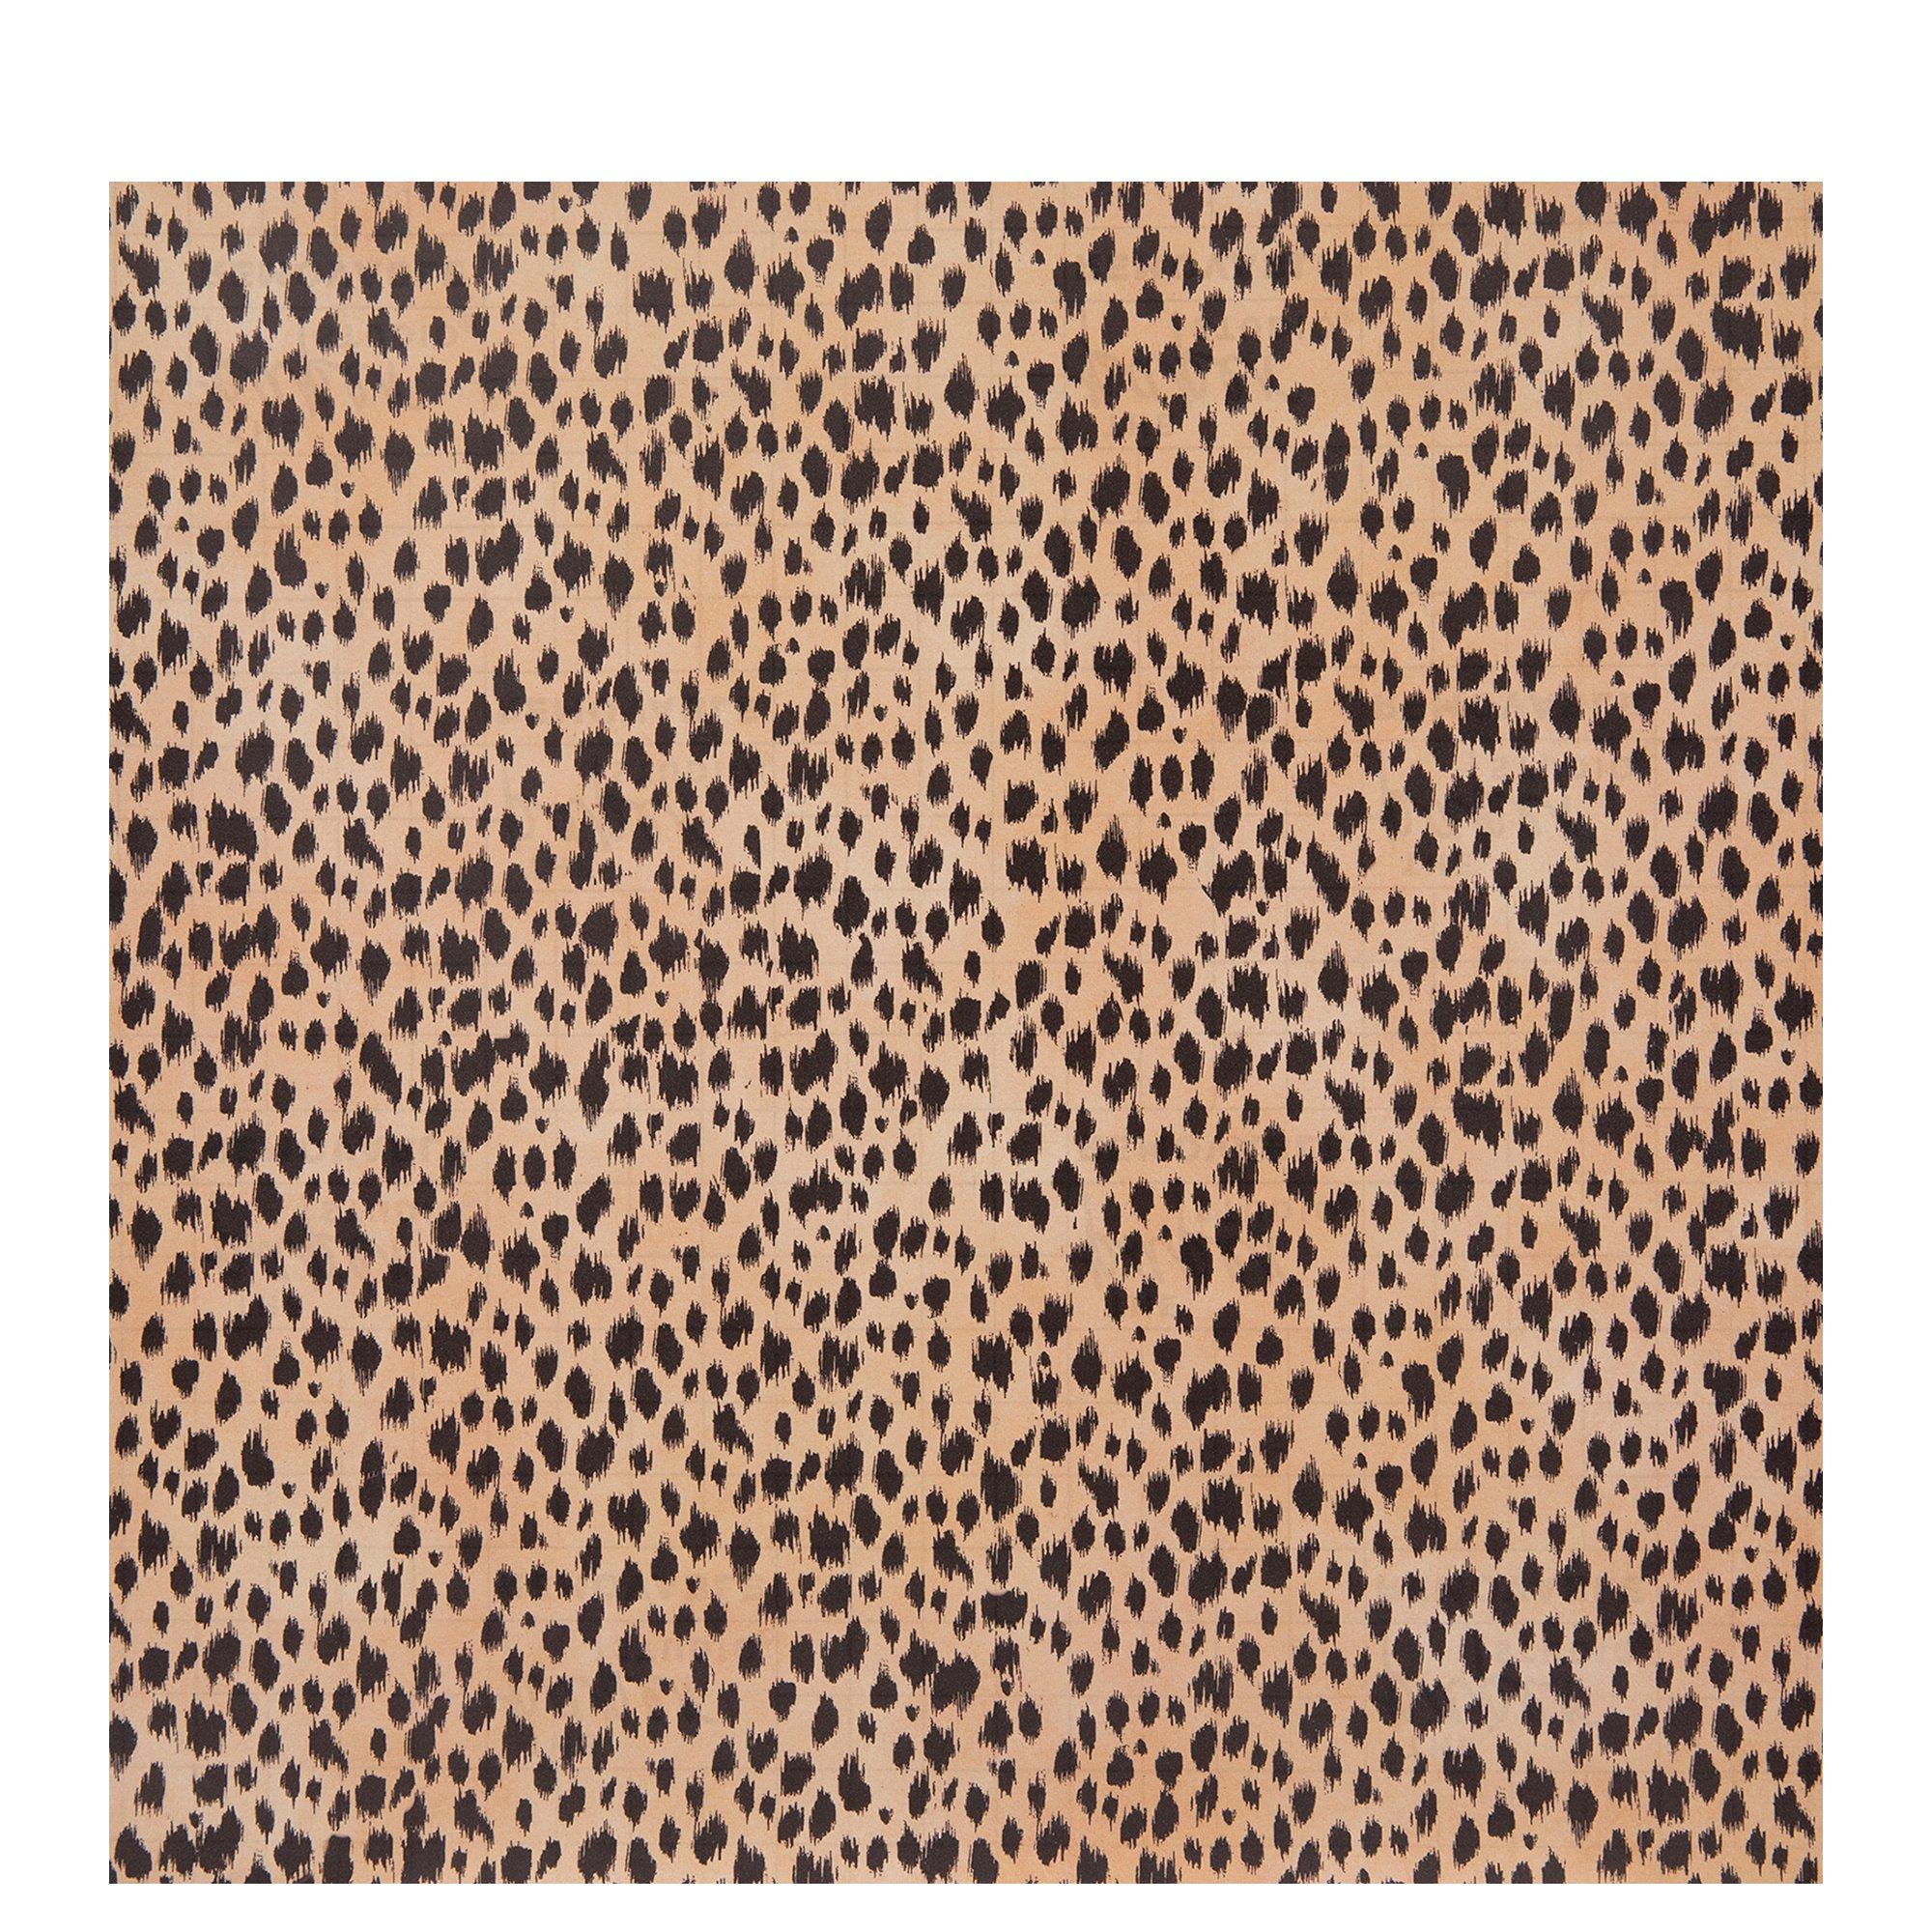 Leopard Print Pattern Self Adhesive Craft Vinyl Printed Sheet Pack for  Cricut, Silhouette, Cameo, Decals, Signs, Stickers by Craftables :  : Home